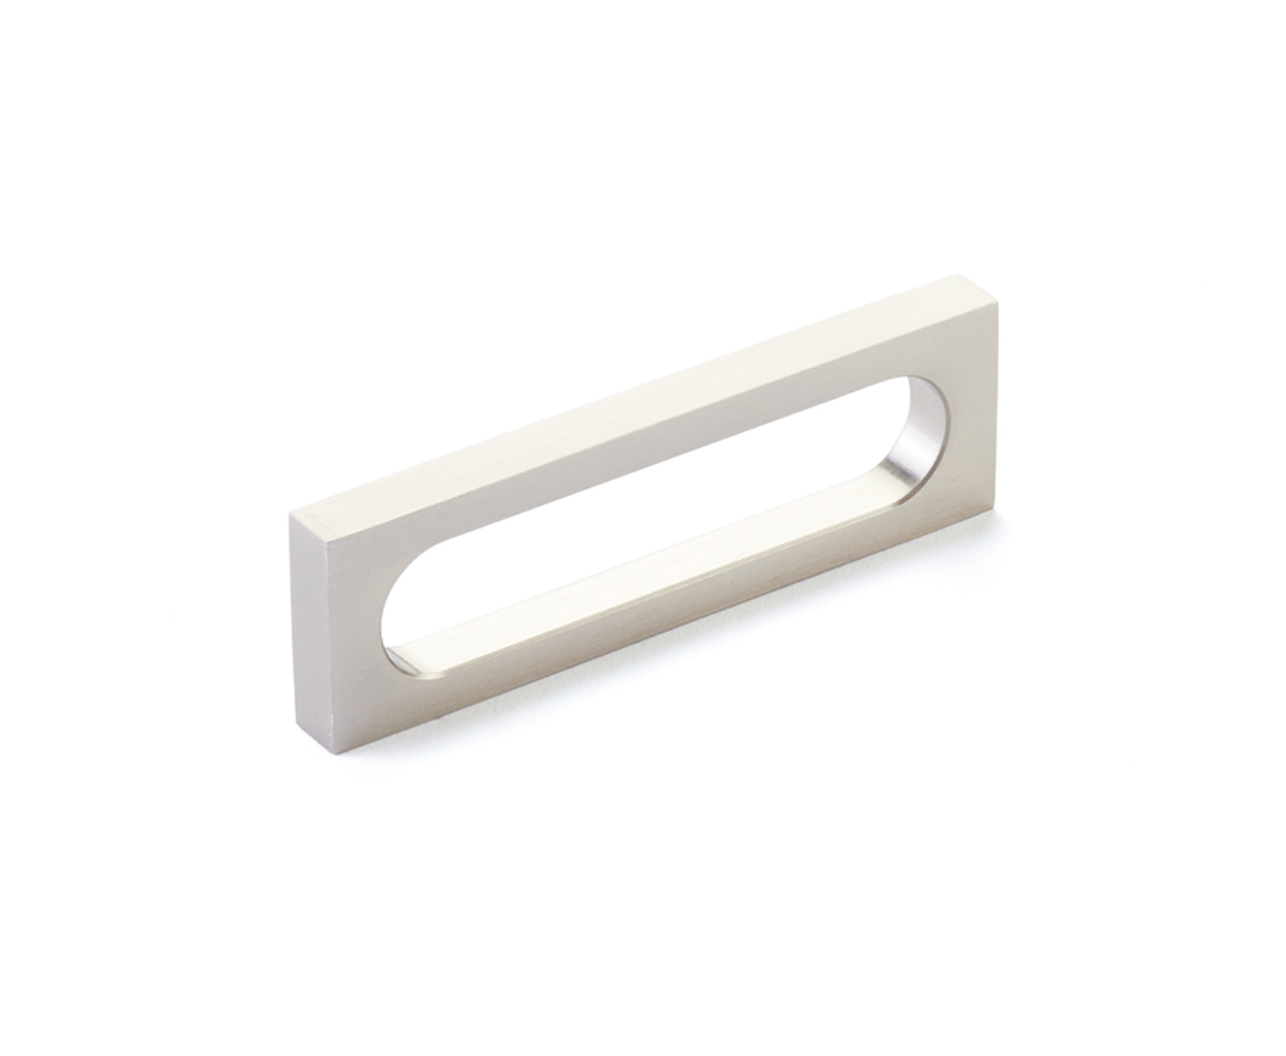 Brushed Nickel "Loop" Square Drawer Pulls and Cabinet Knobs